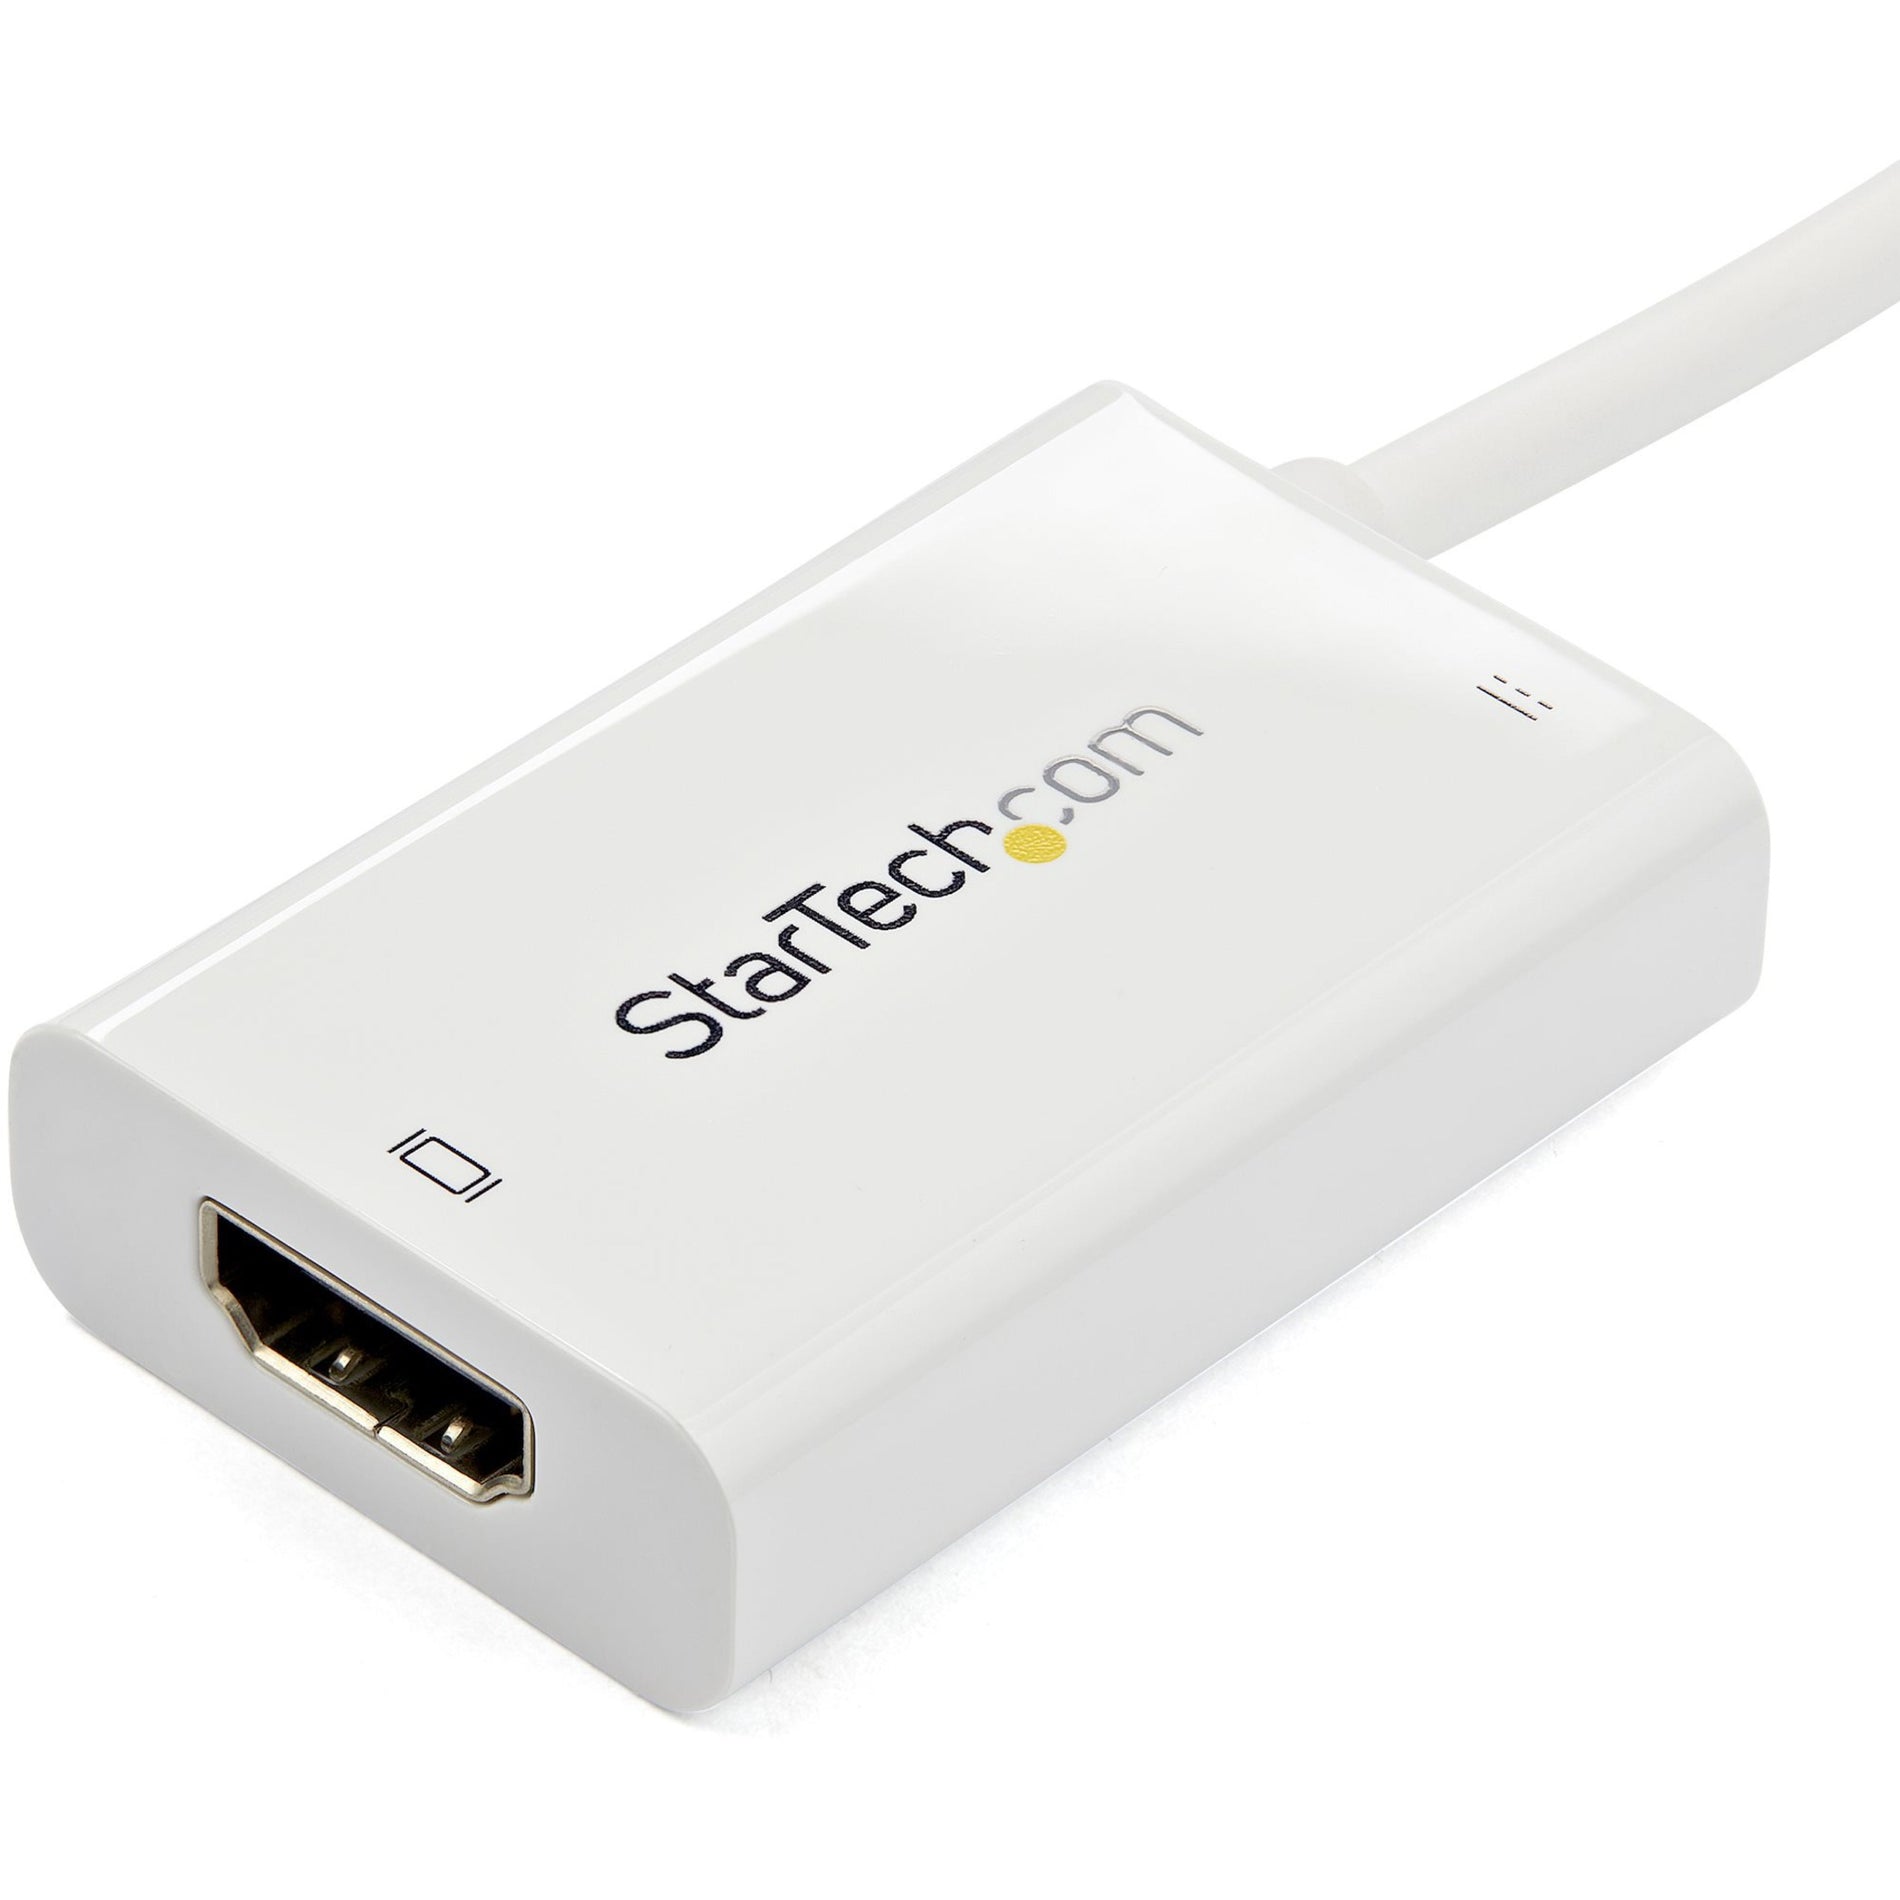 StarTech.com CDP2HDUCPW USB-C to HDMI Video Adapter with USB Power Delivery - 4K 60Hz, White [Discontinued]